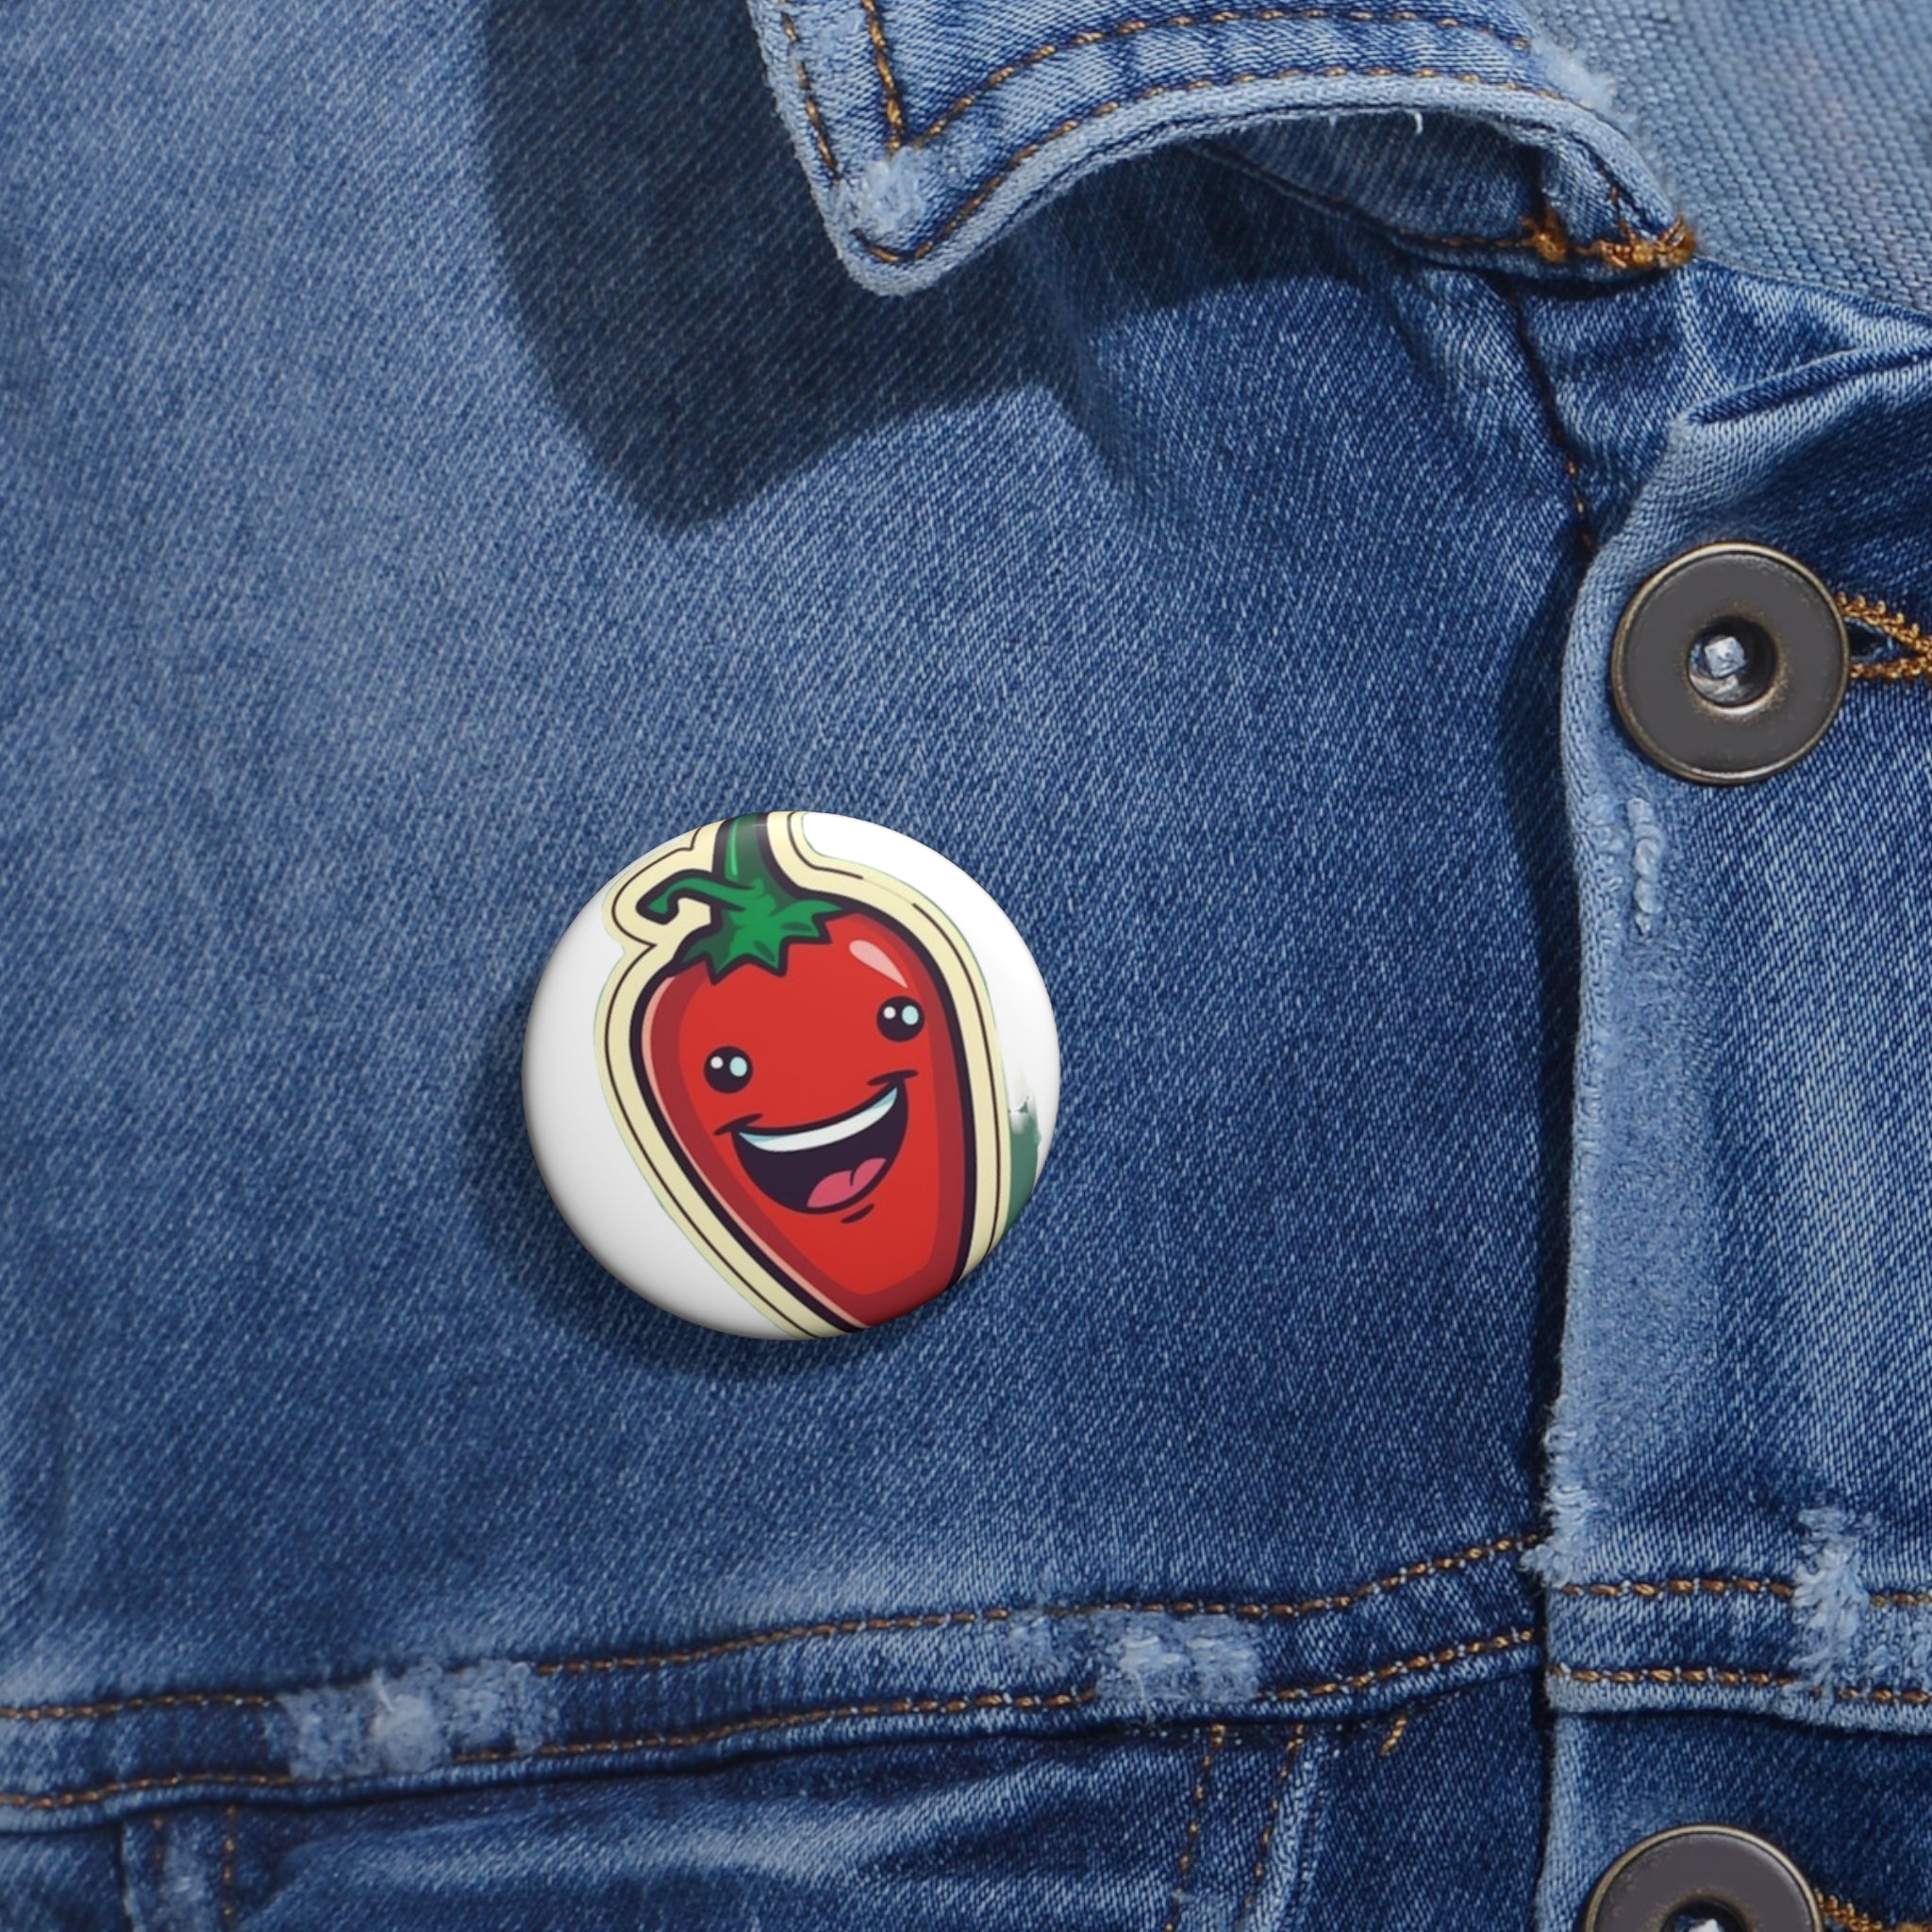 Custom Pin Buttons - Red Chili Pepper